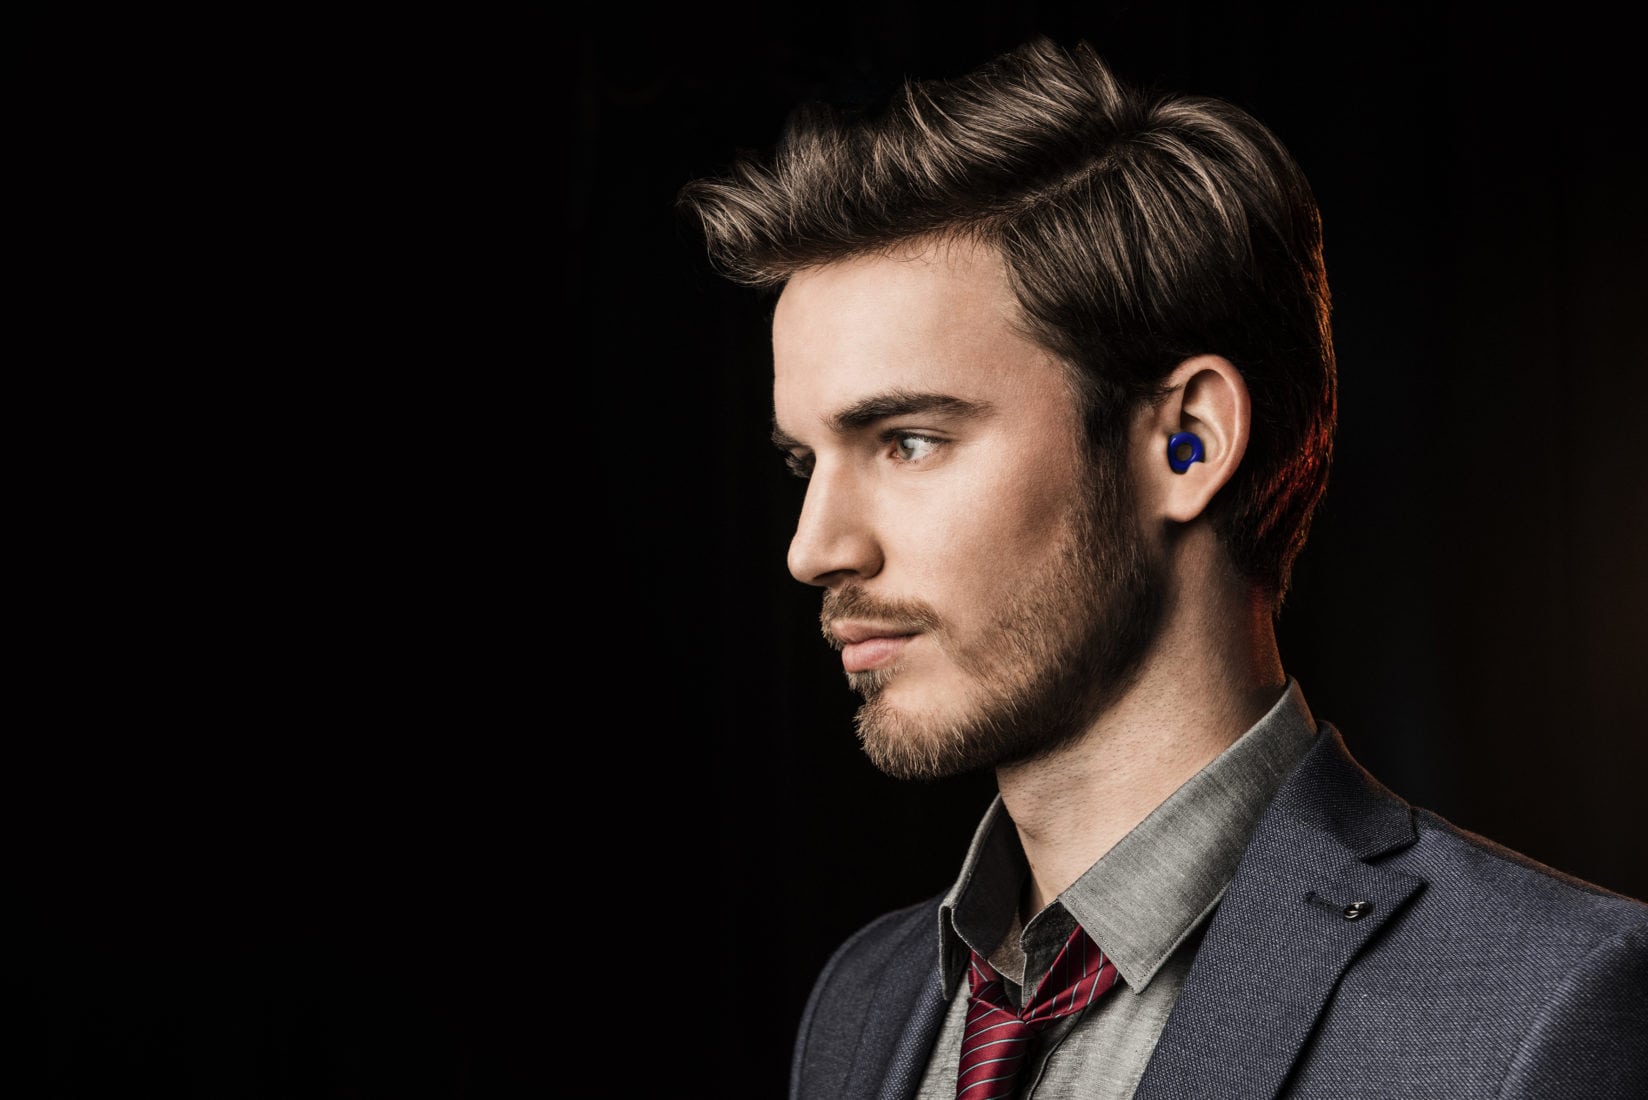 The Loop, ear protection for nightlife, is now being sold worldwide for €39.00 in black, blue and red.